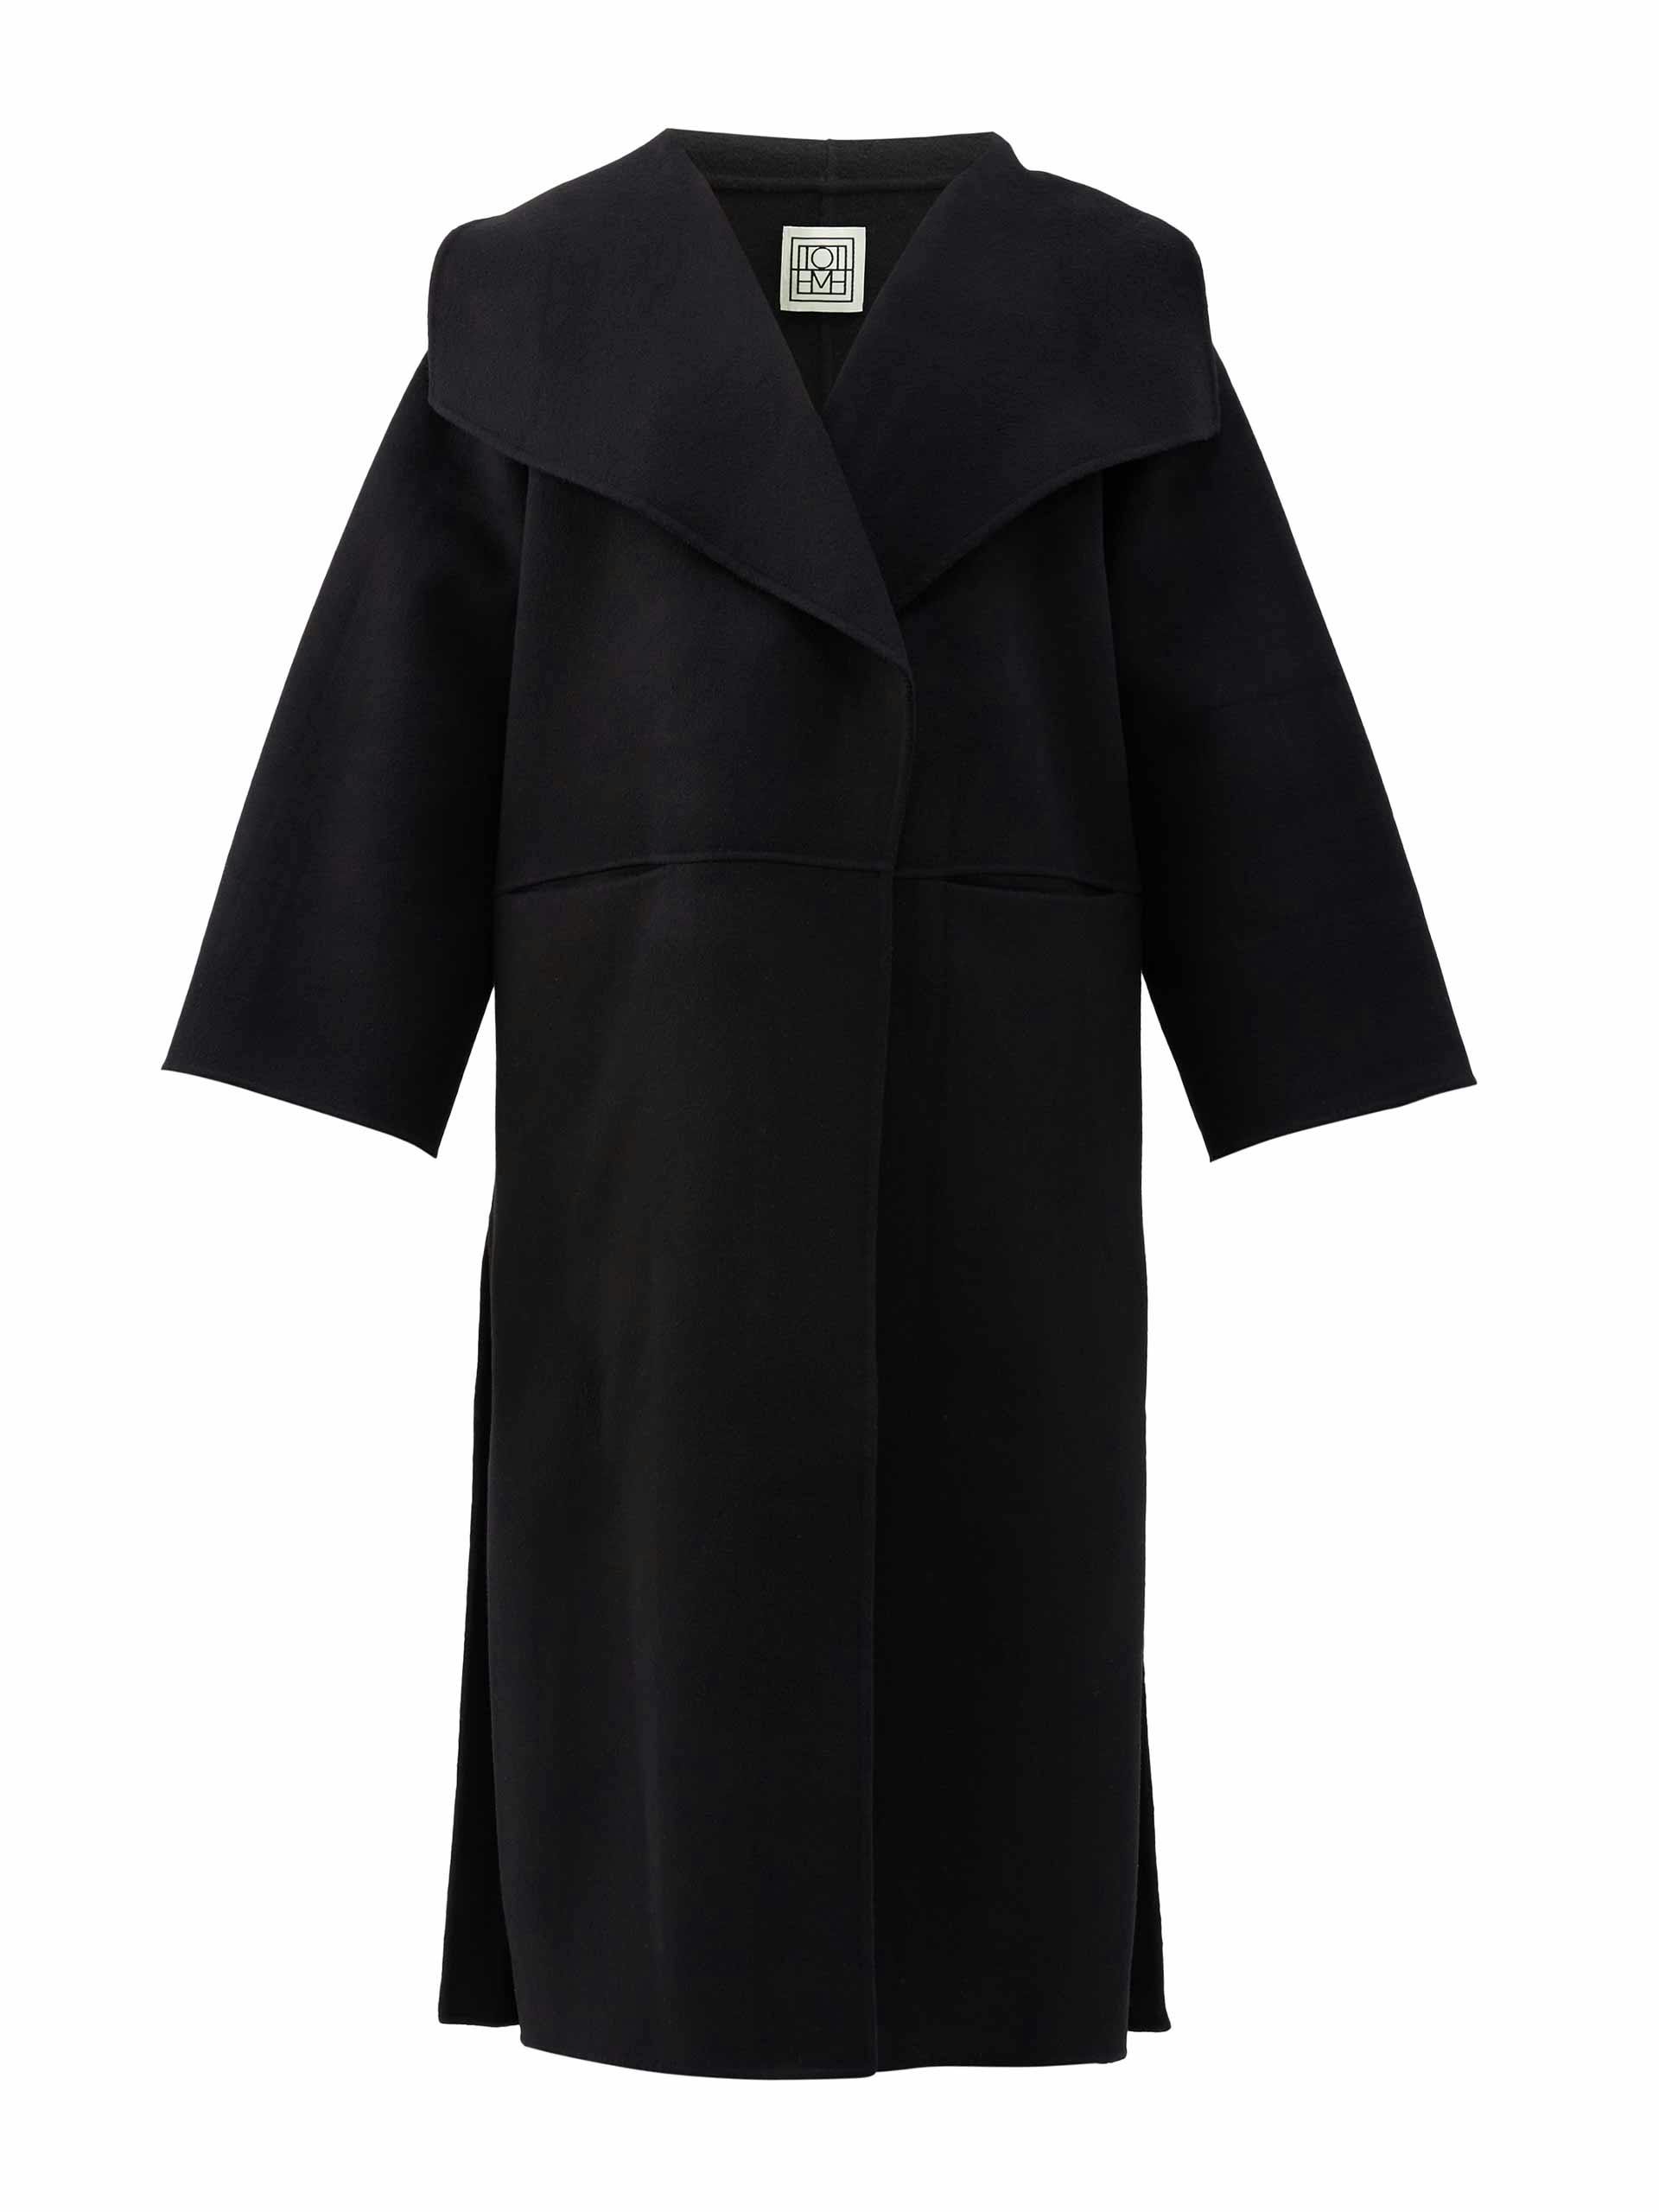 Signature pressed wool and cashmere coat